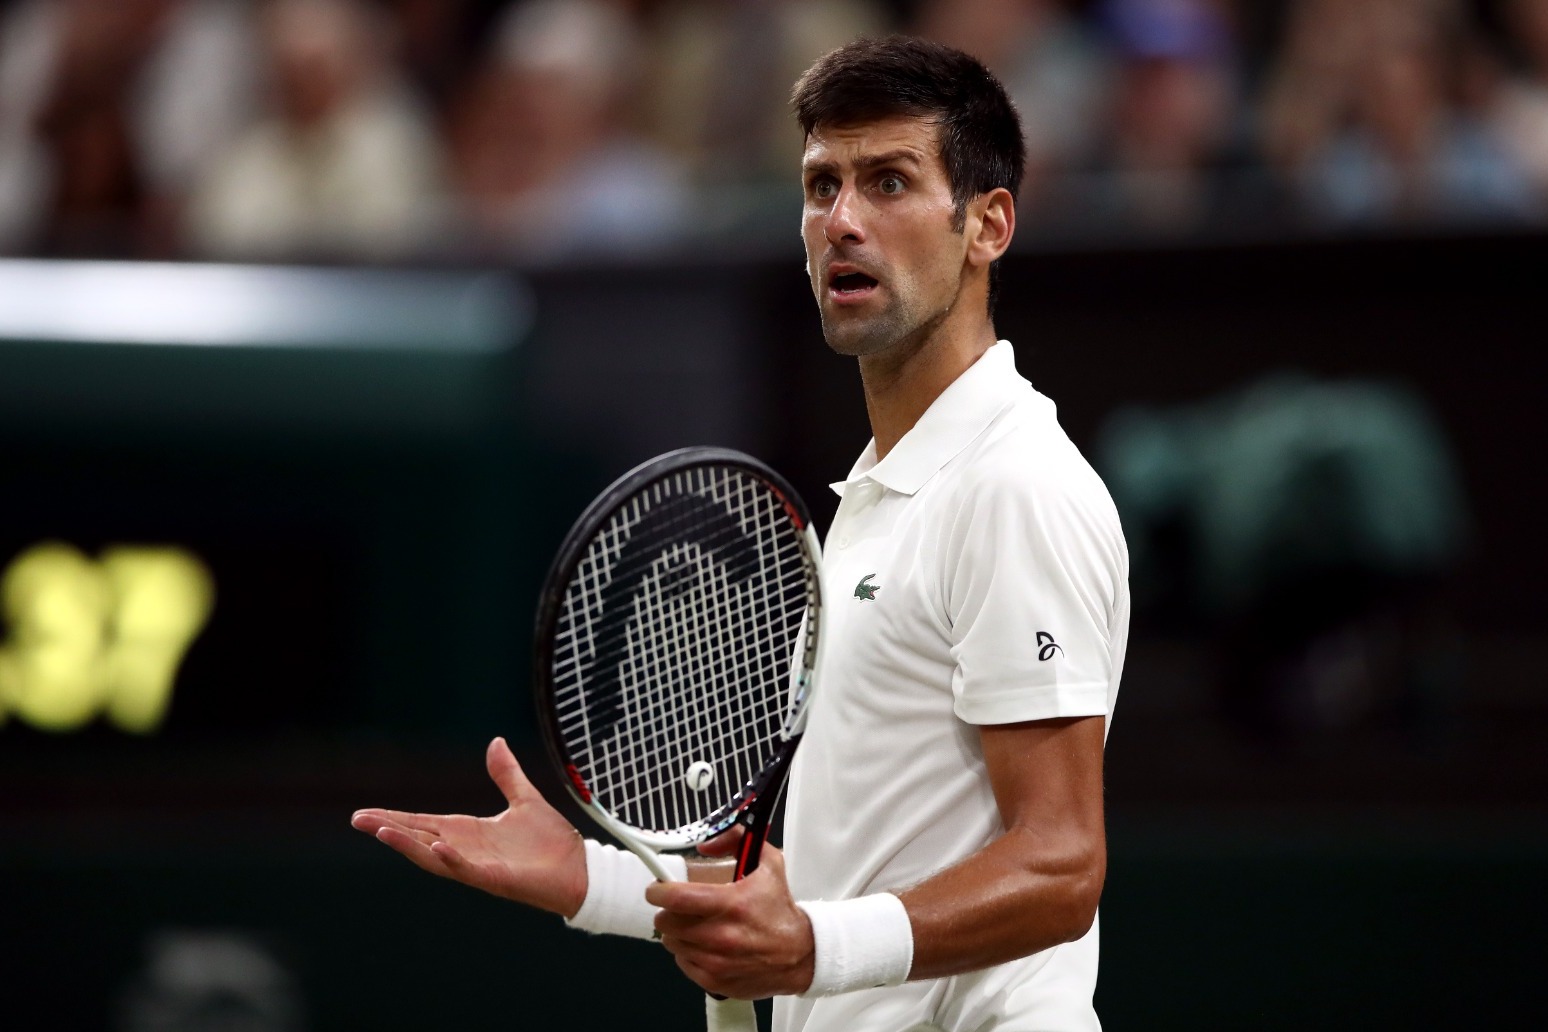 Novak Djokovic will not defend Wimbledon or French Open if mandatory jabs required